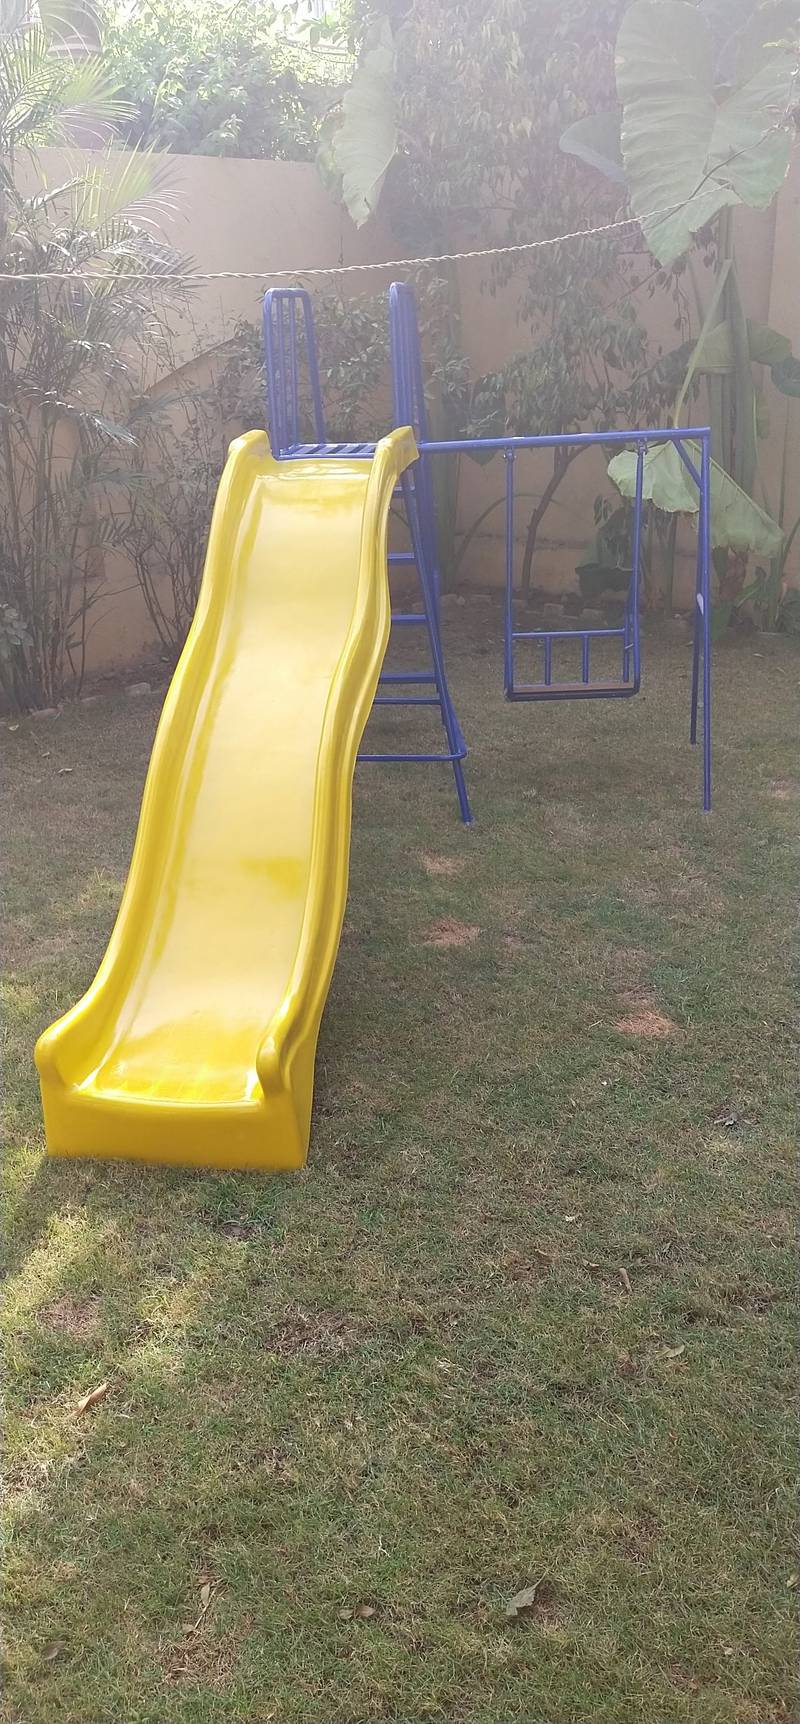 Slide with Swing 6